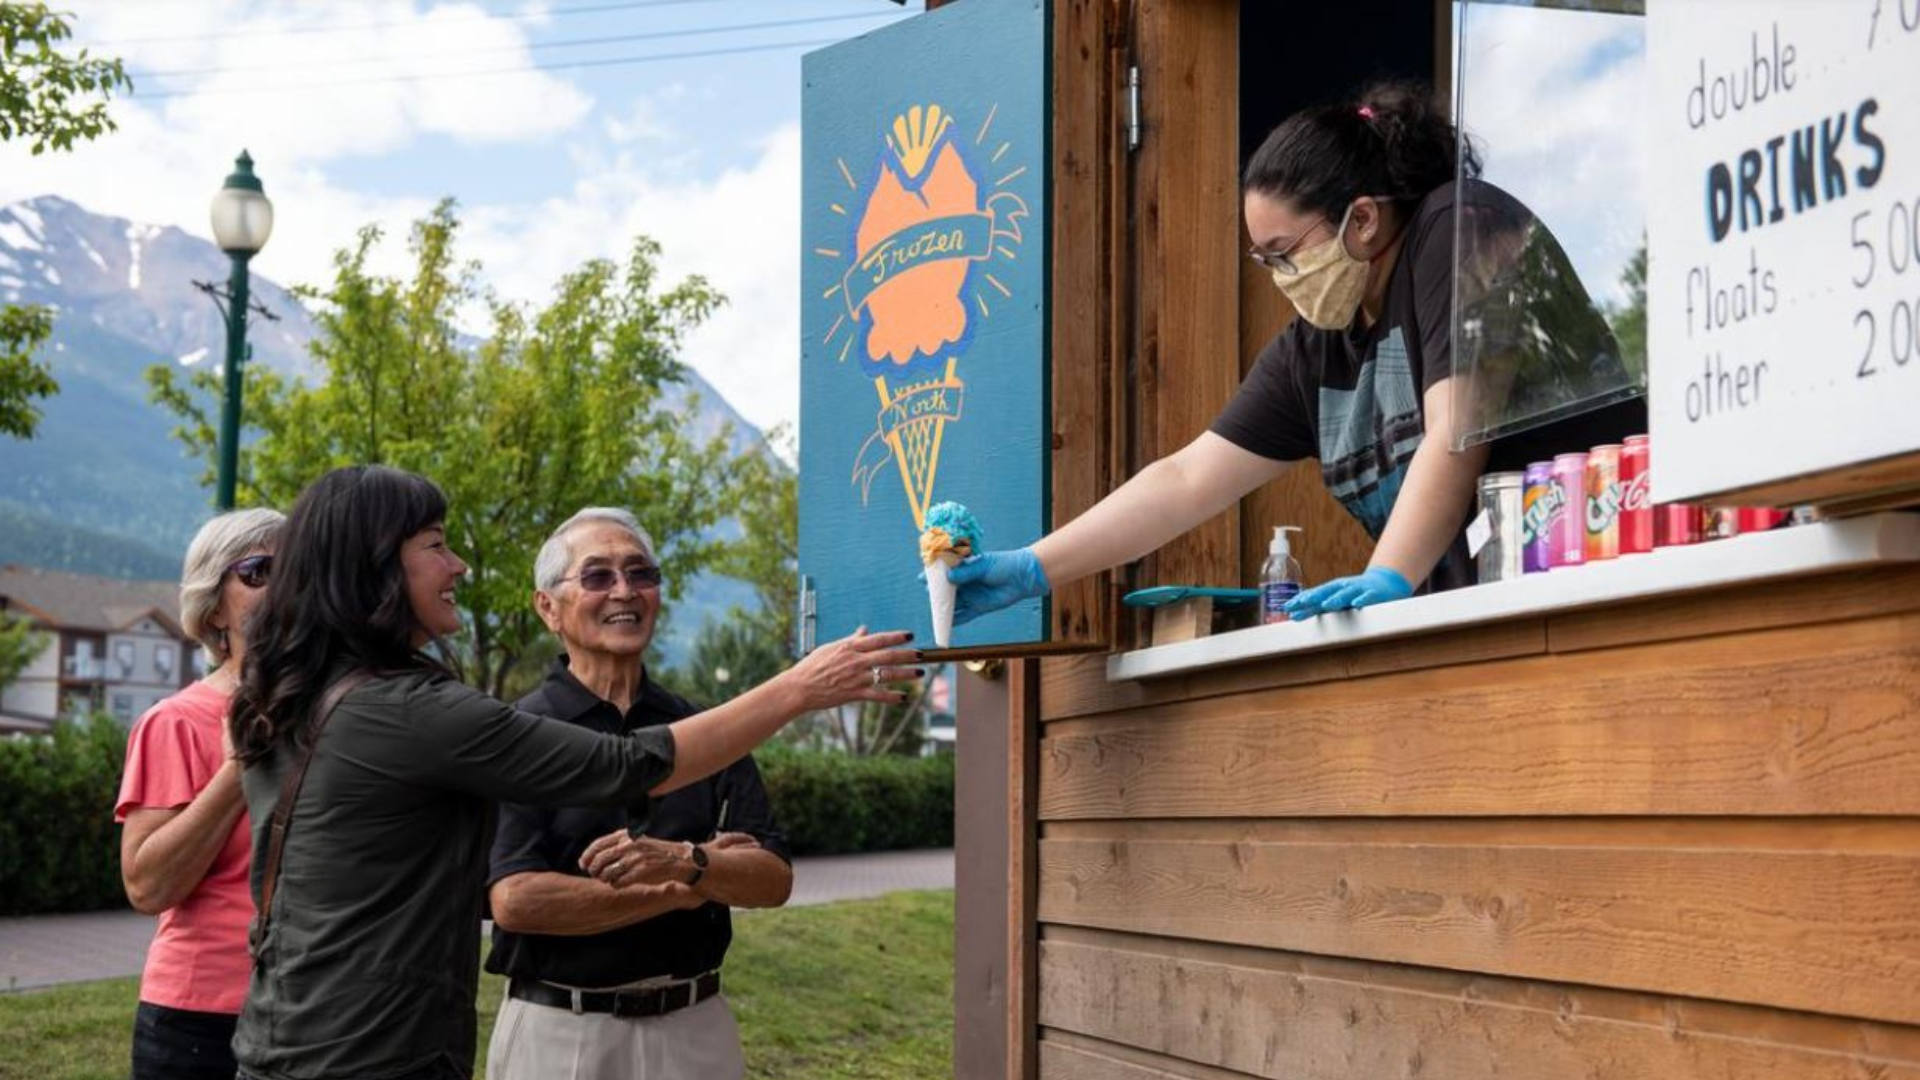 Image of an employee passes an ice cream cone to a group of customers at an ice cream stand